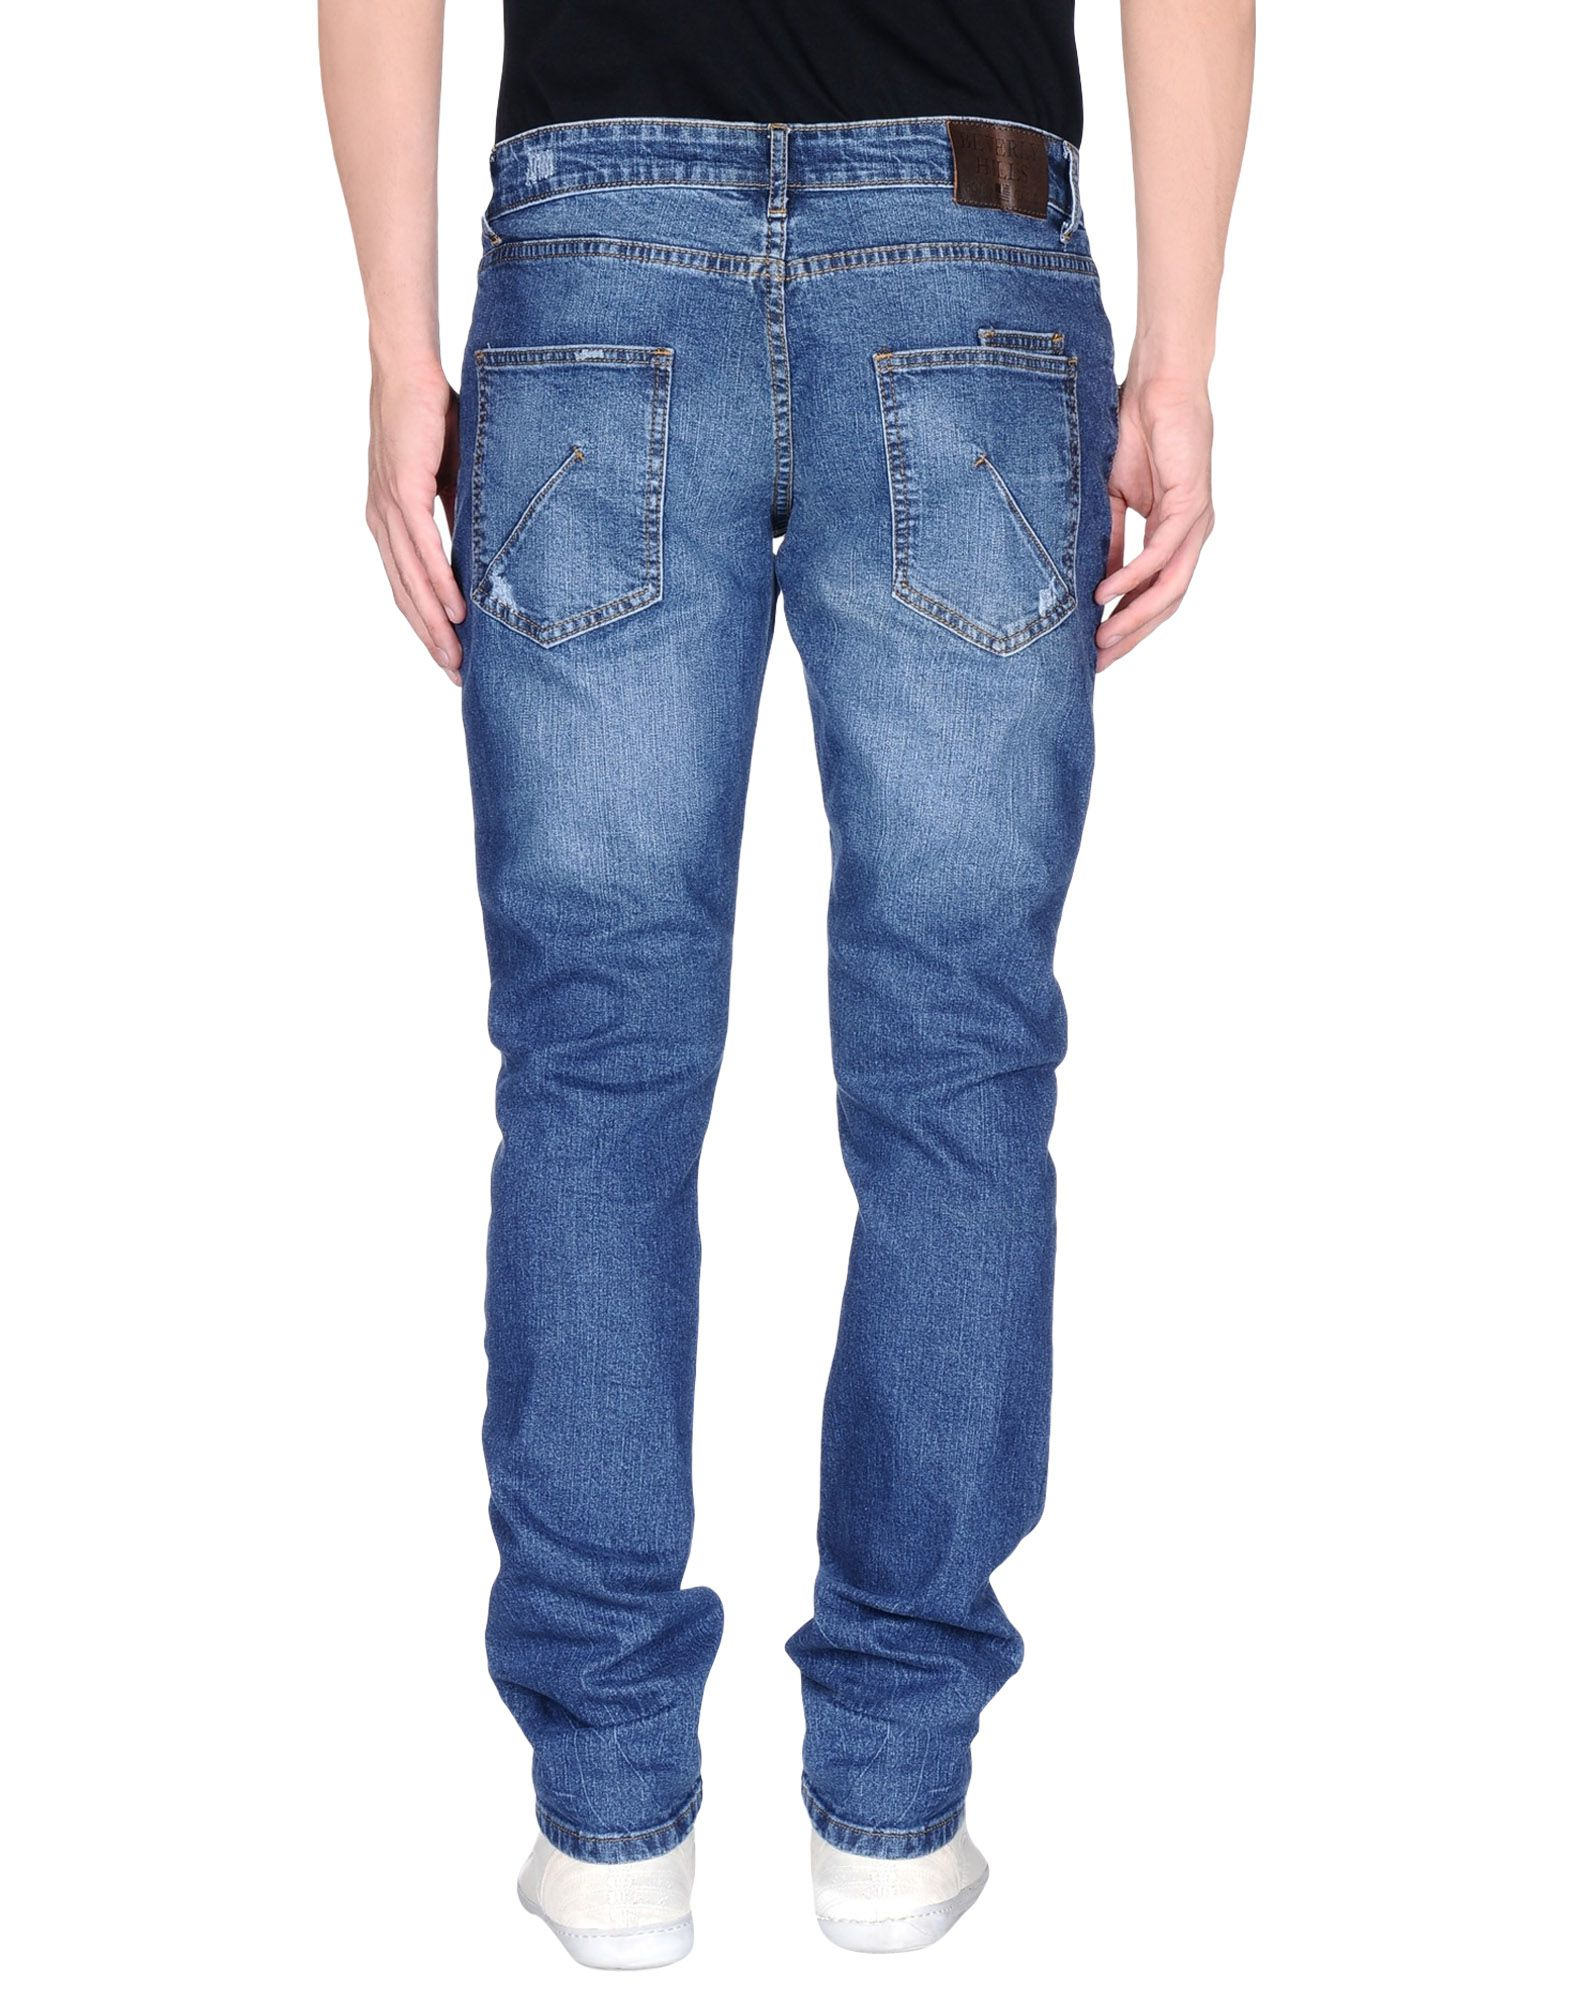 Lyst - Beverly Hills Polo Club Denim Trousers in Blue for Men